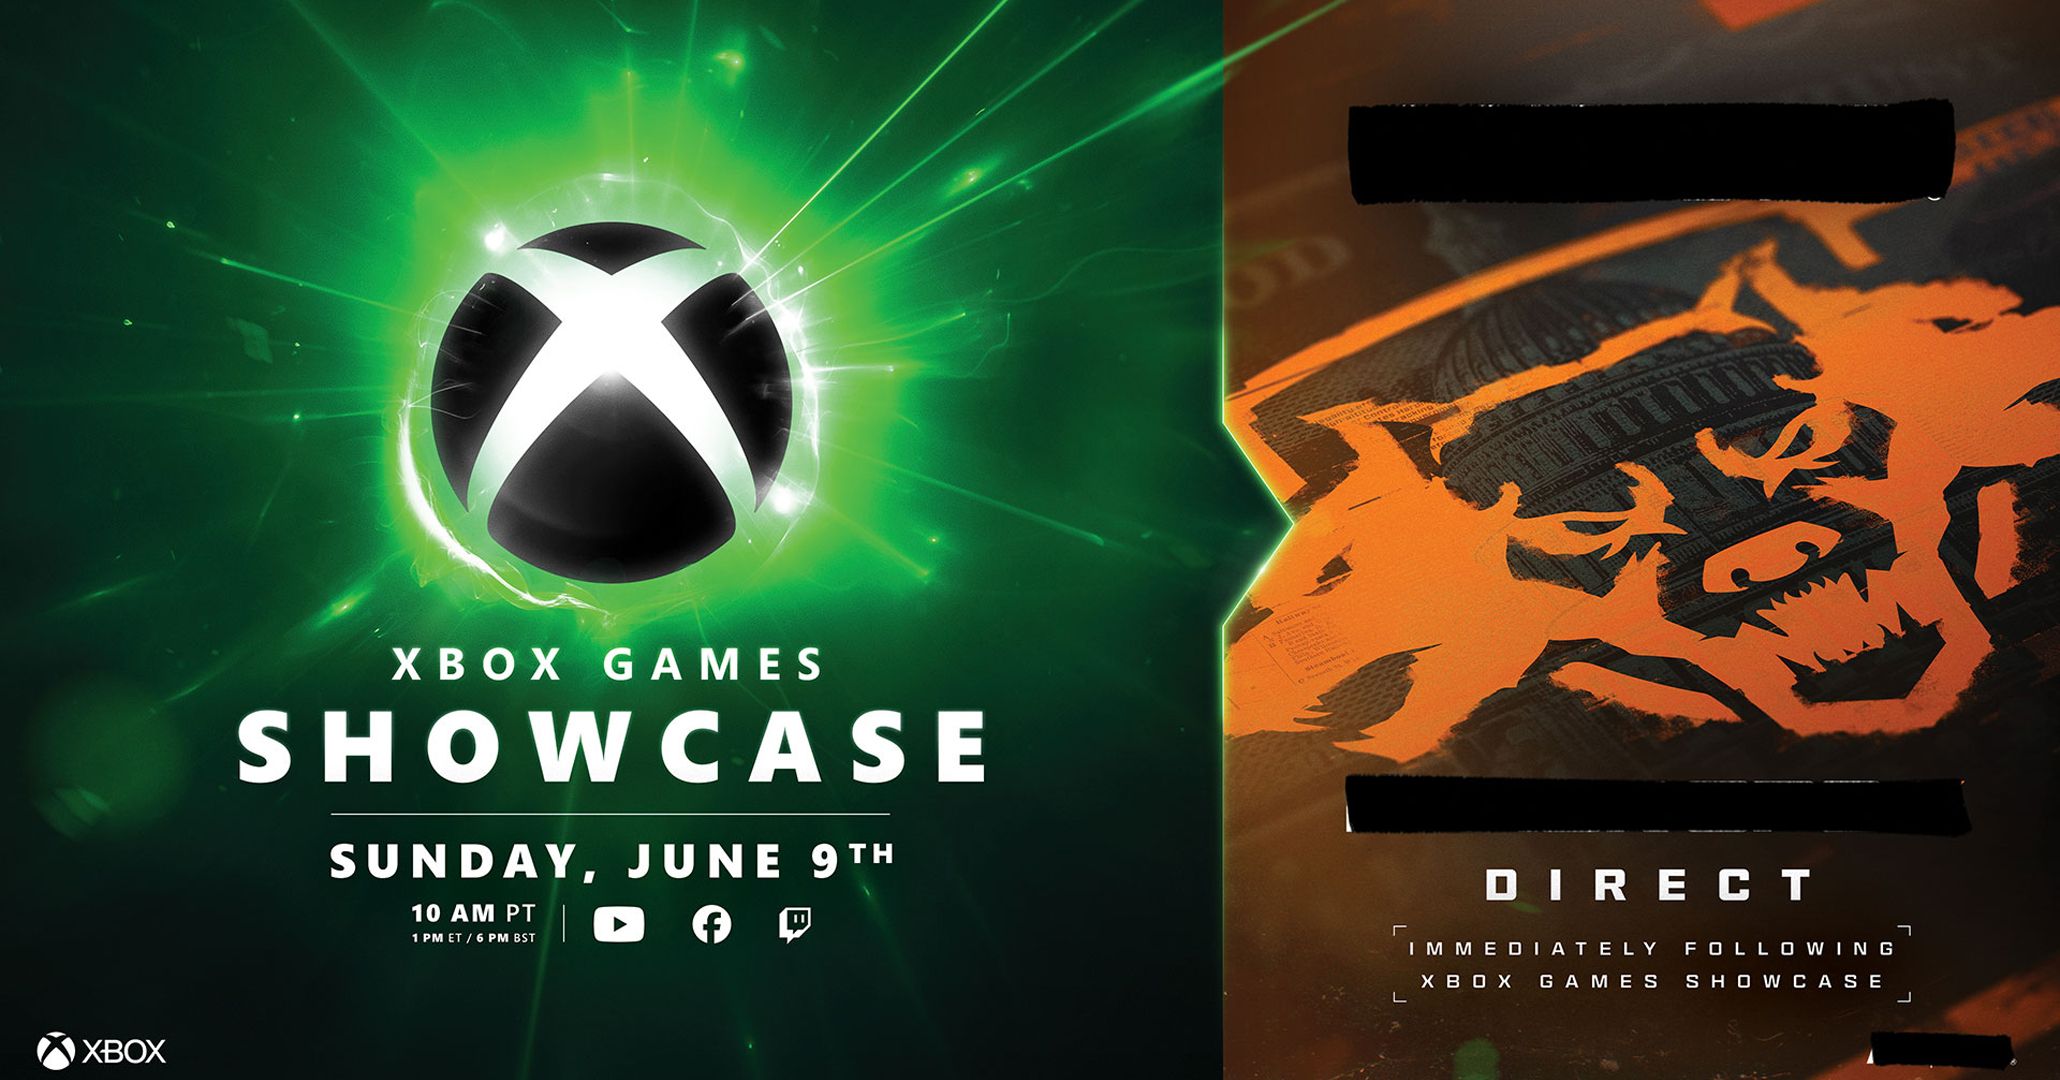 Xbox Games Showcase with a teaser for a Call of Duty direct with blacked-out information.